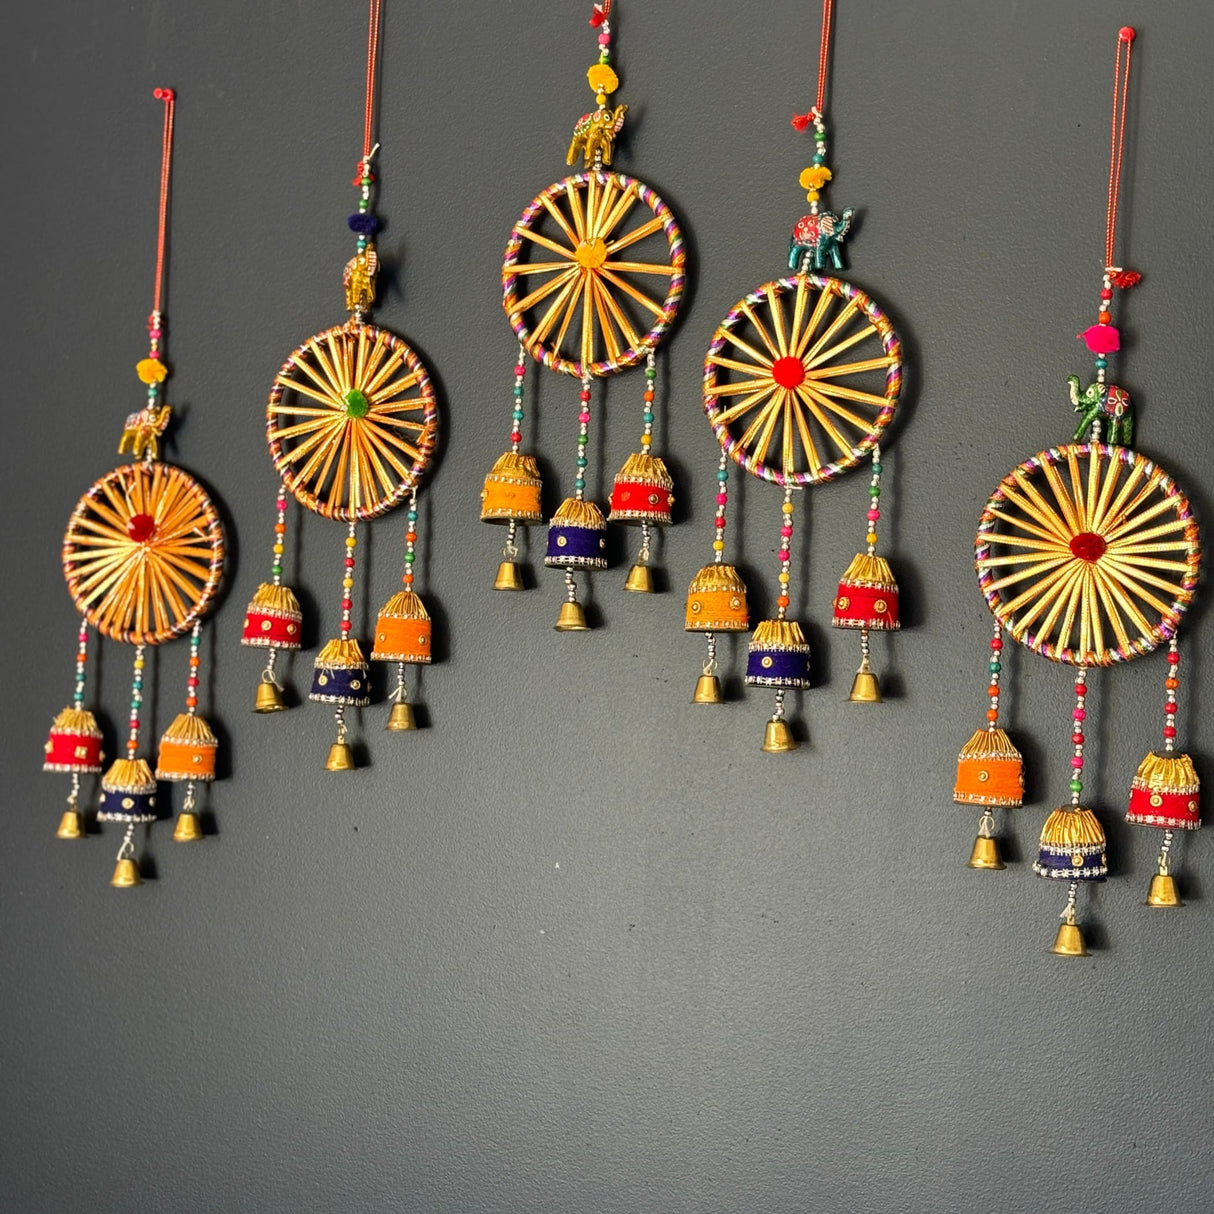 Rajasthani ring elephant wall door hangings with bells